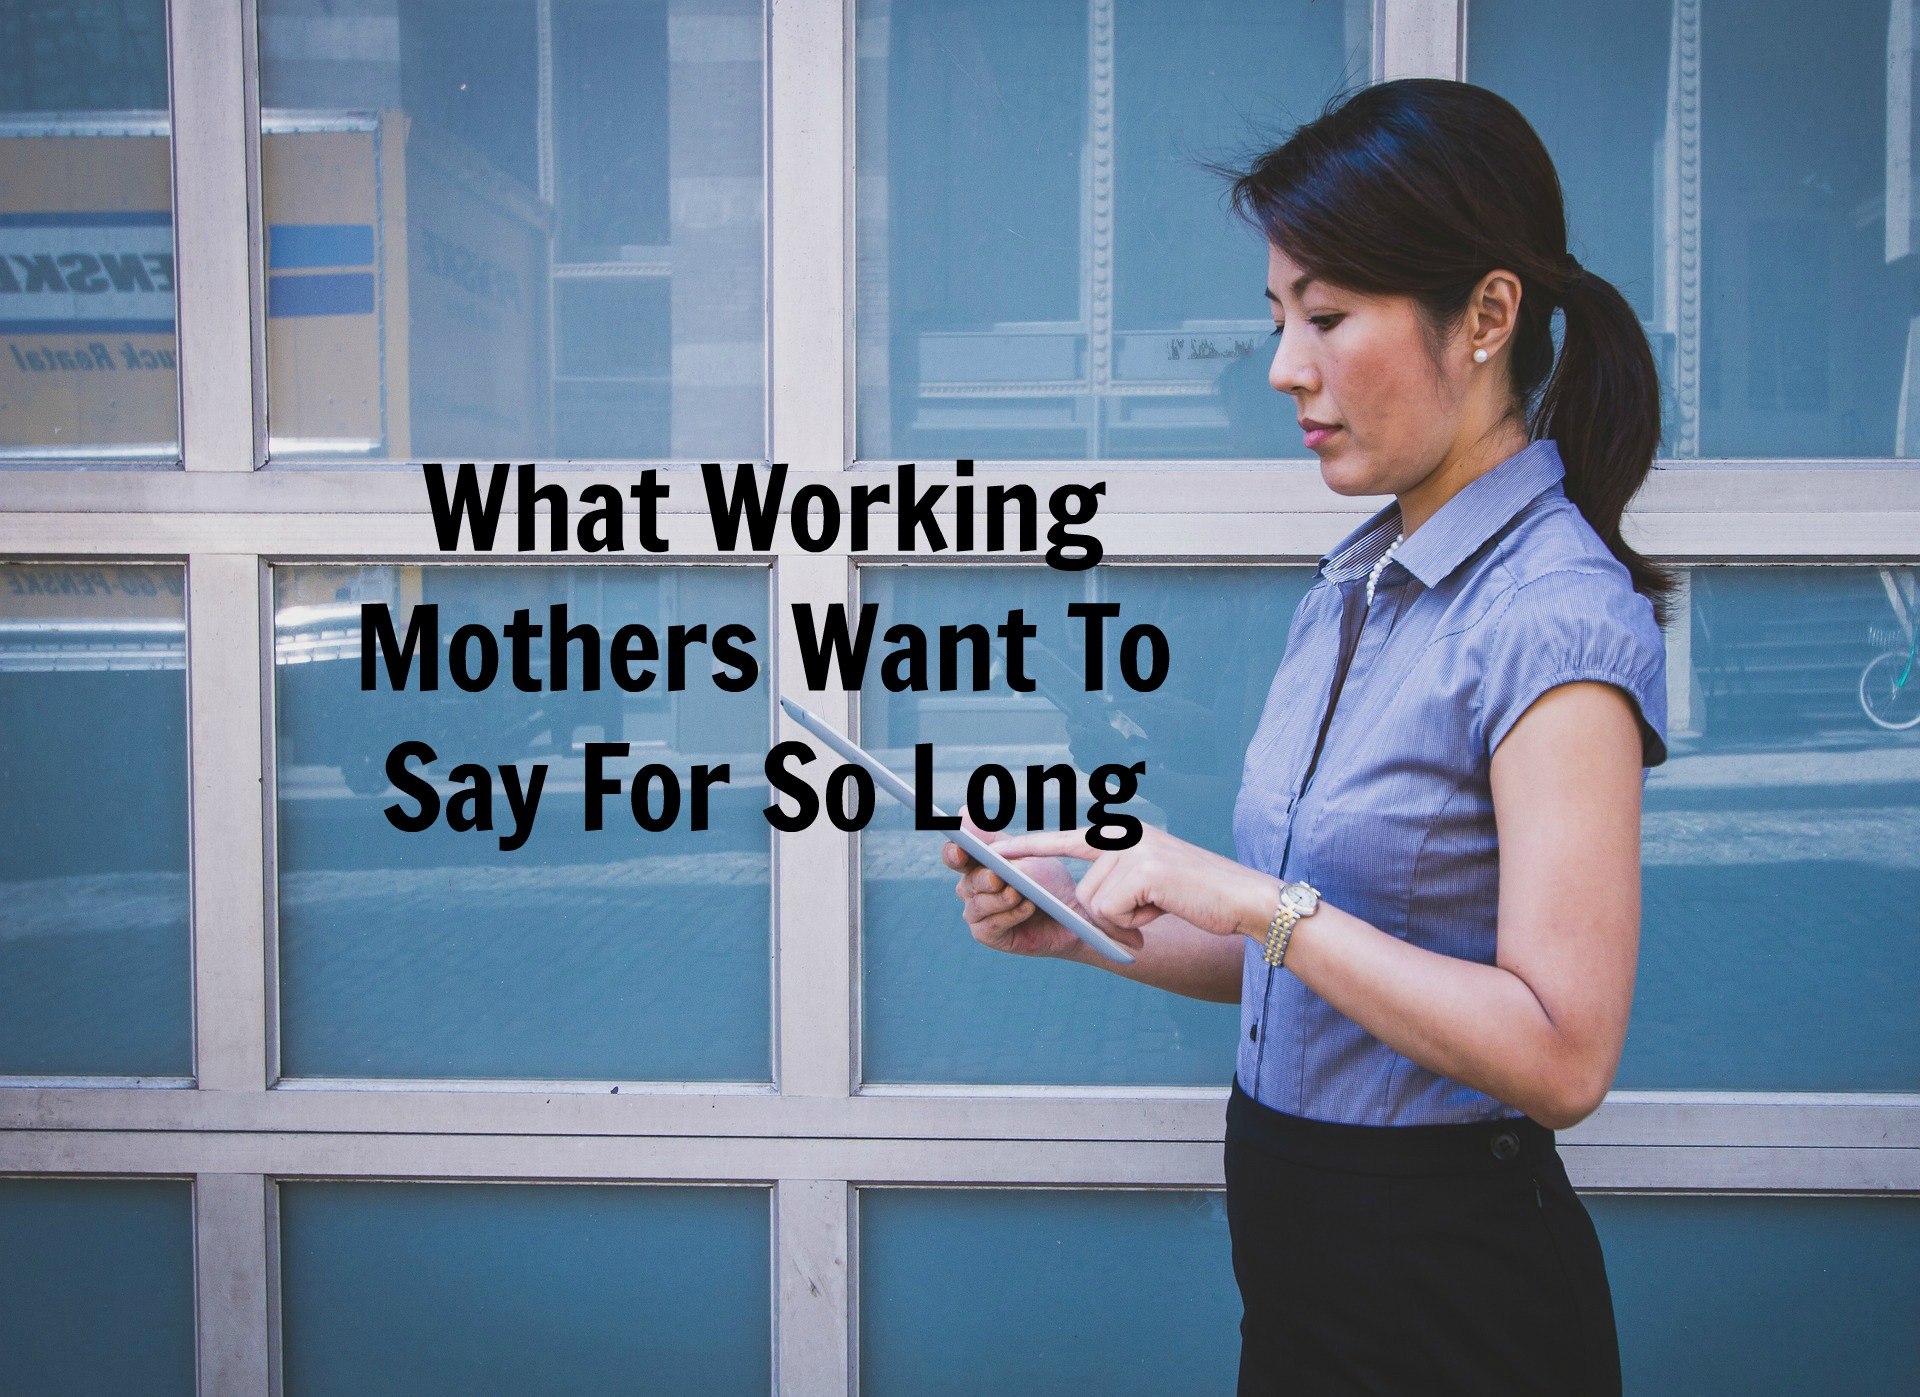 What Working Mothers Want To Say For So Long